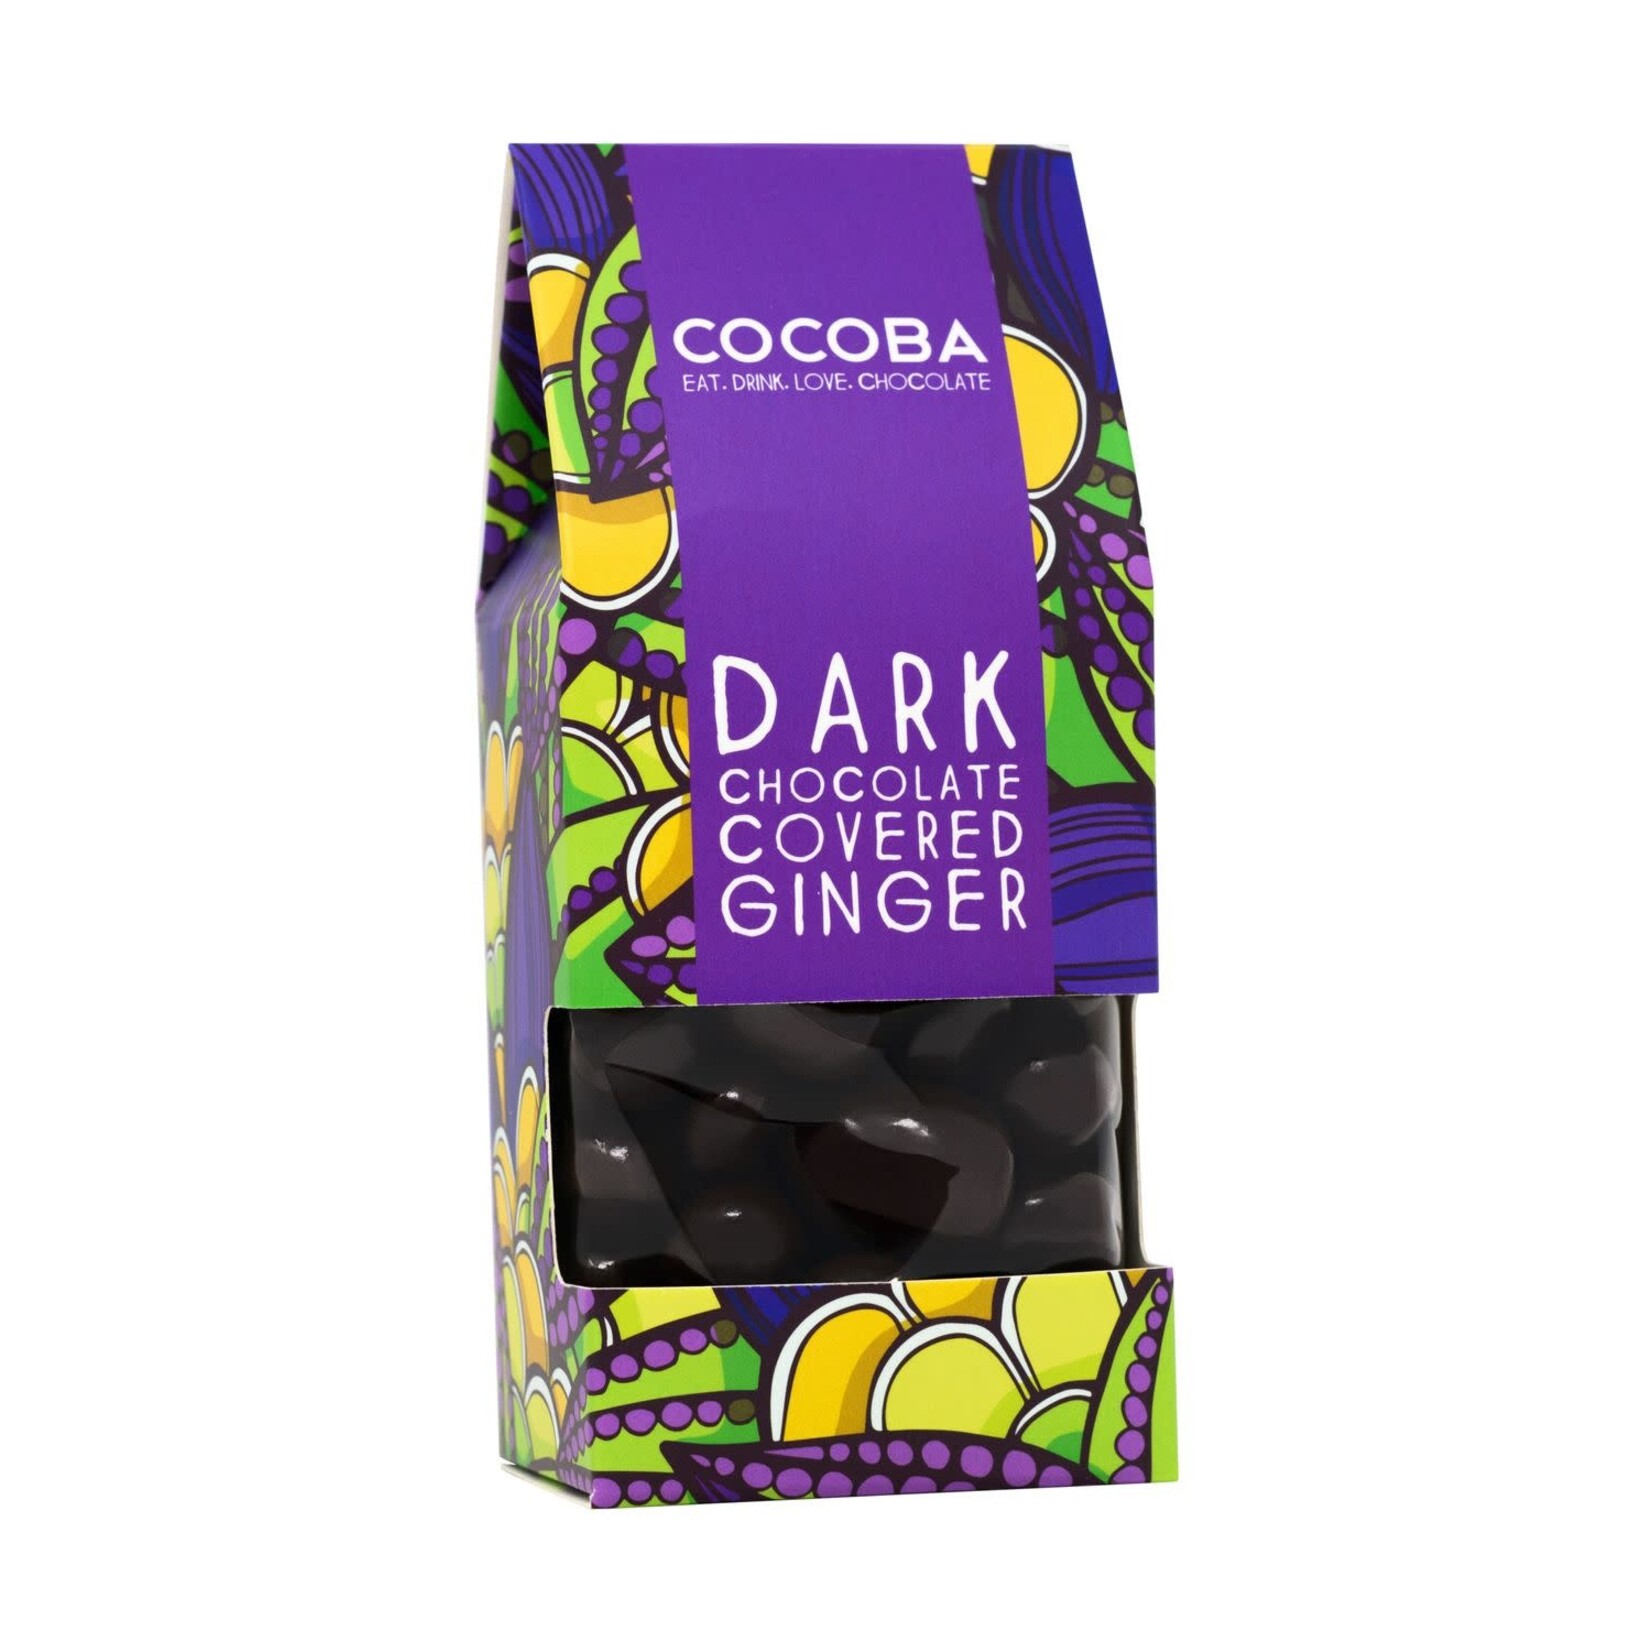 Cocoba Dark Chocolate Covered Ginger